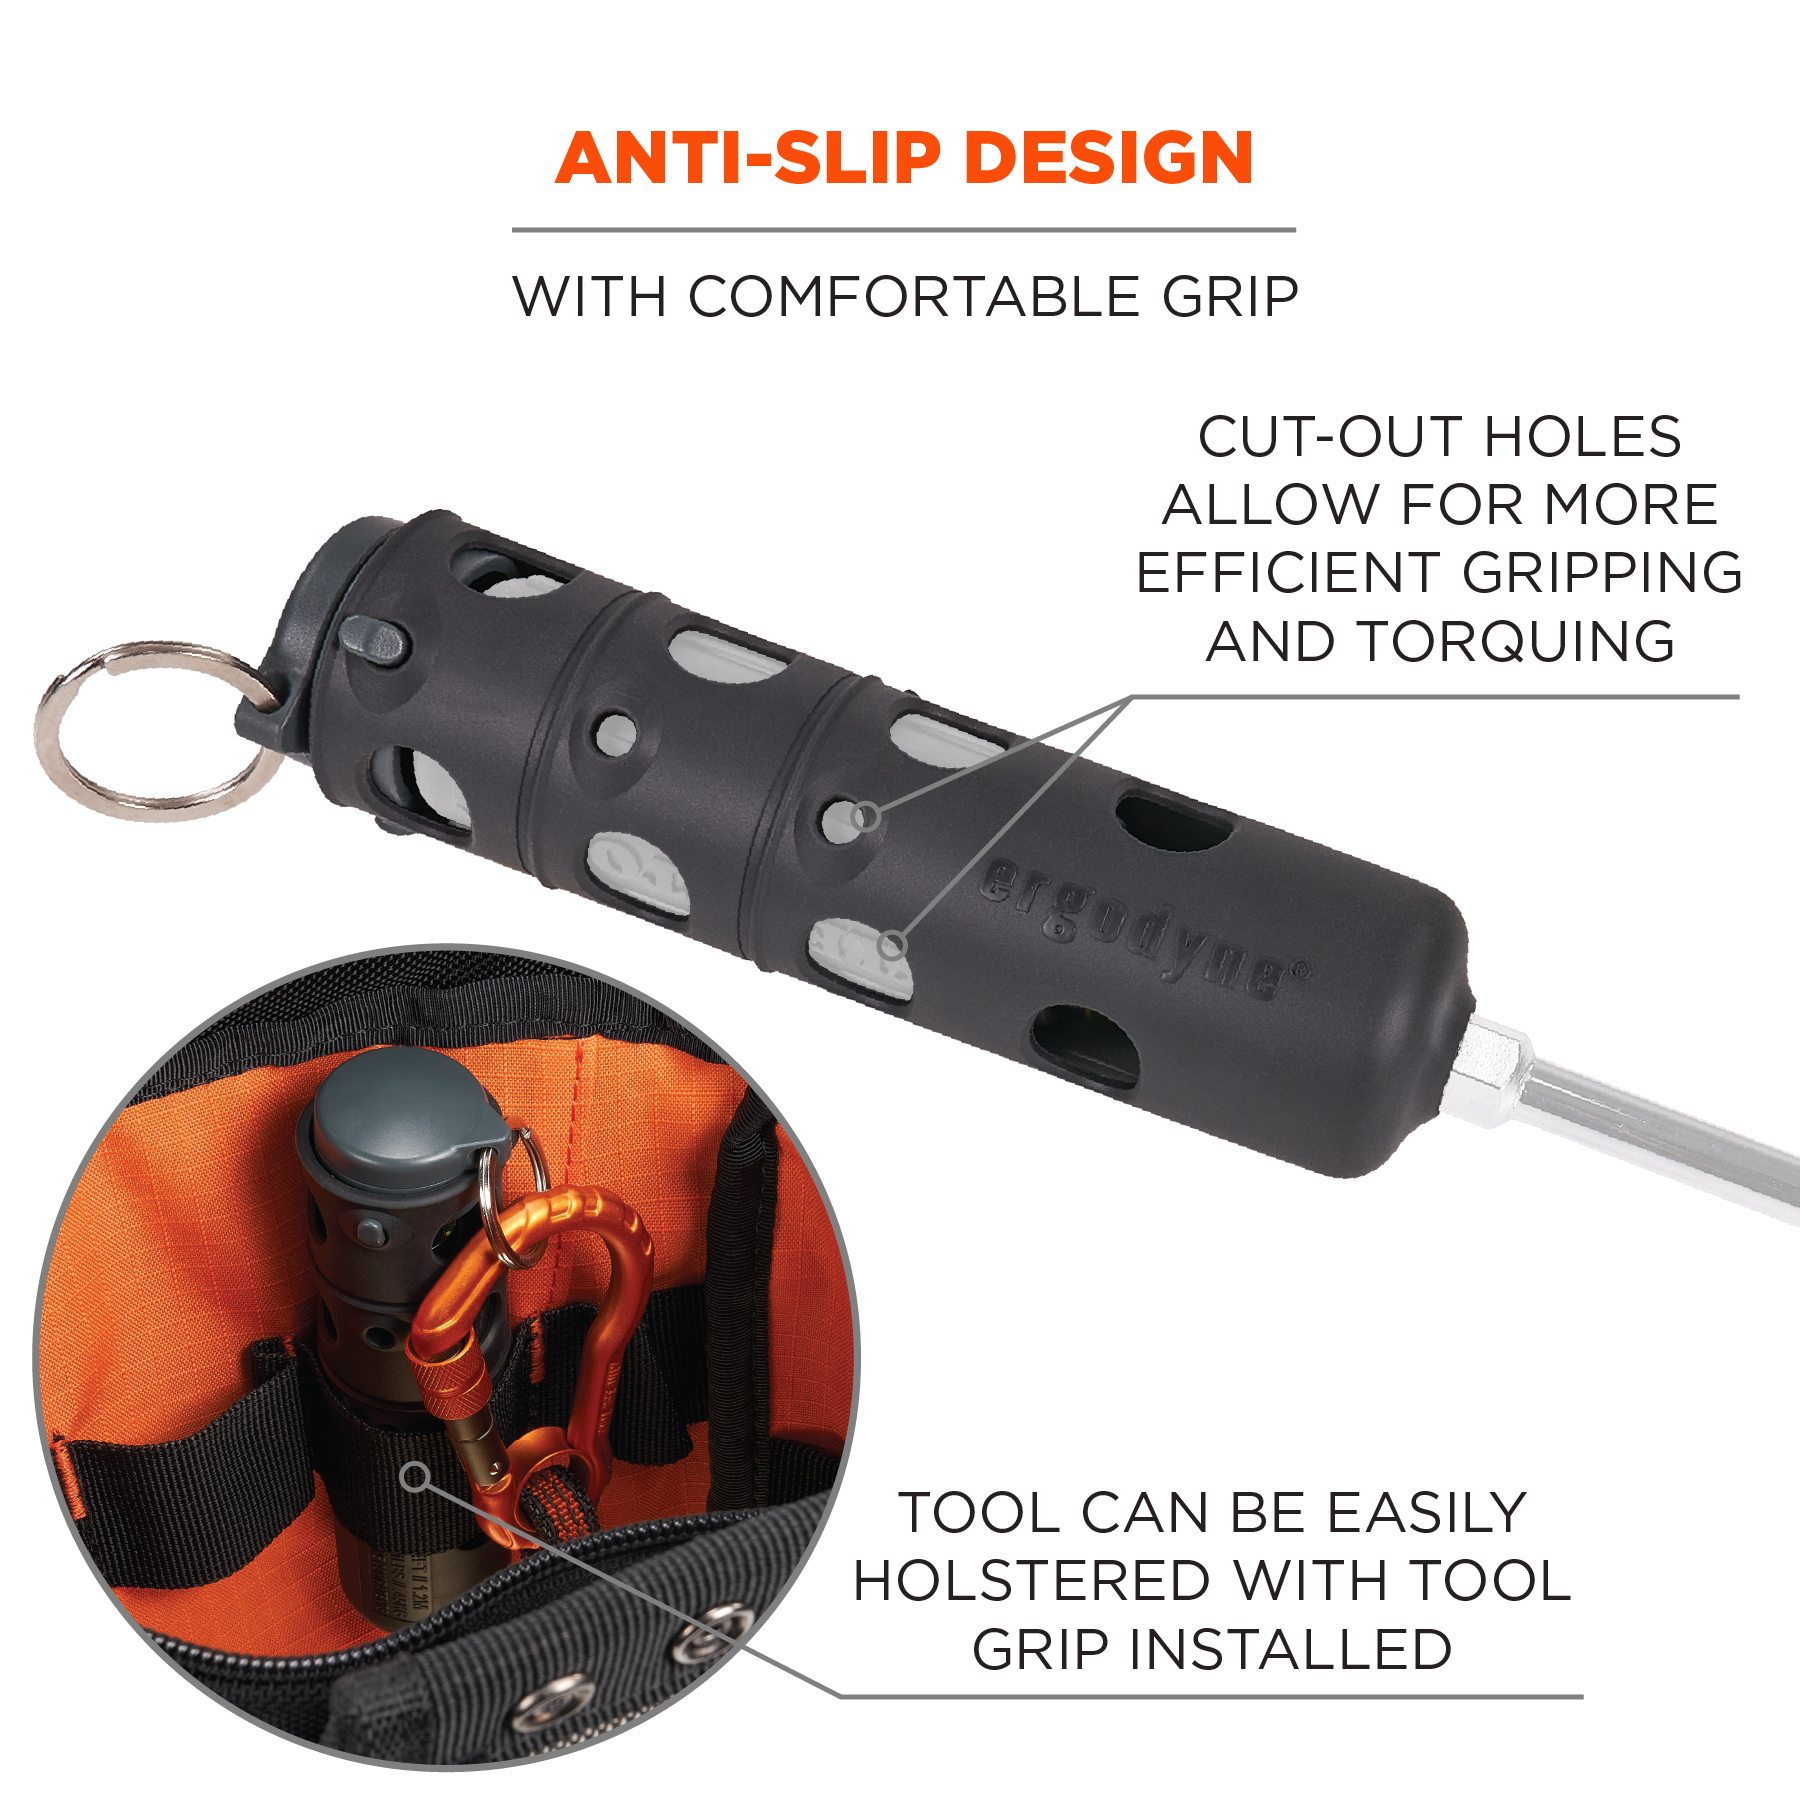 Tool Grip and Tether Attachment Point